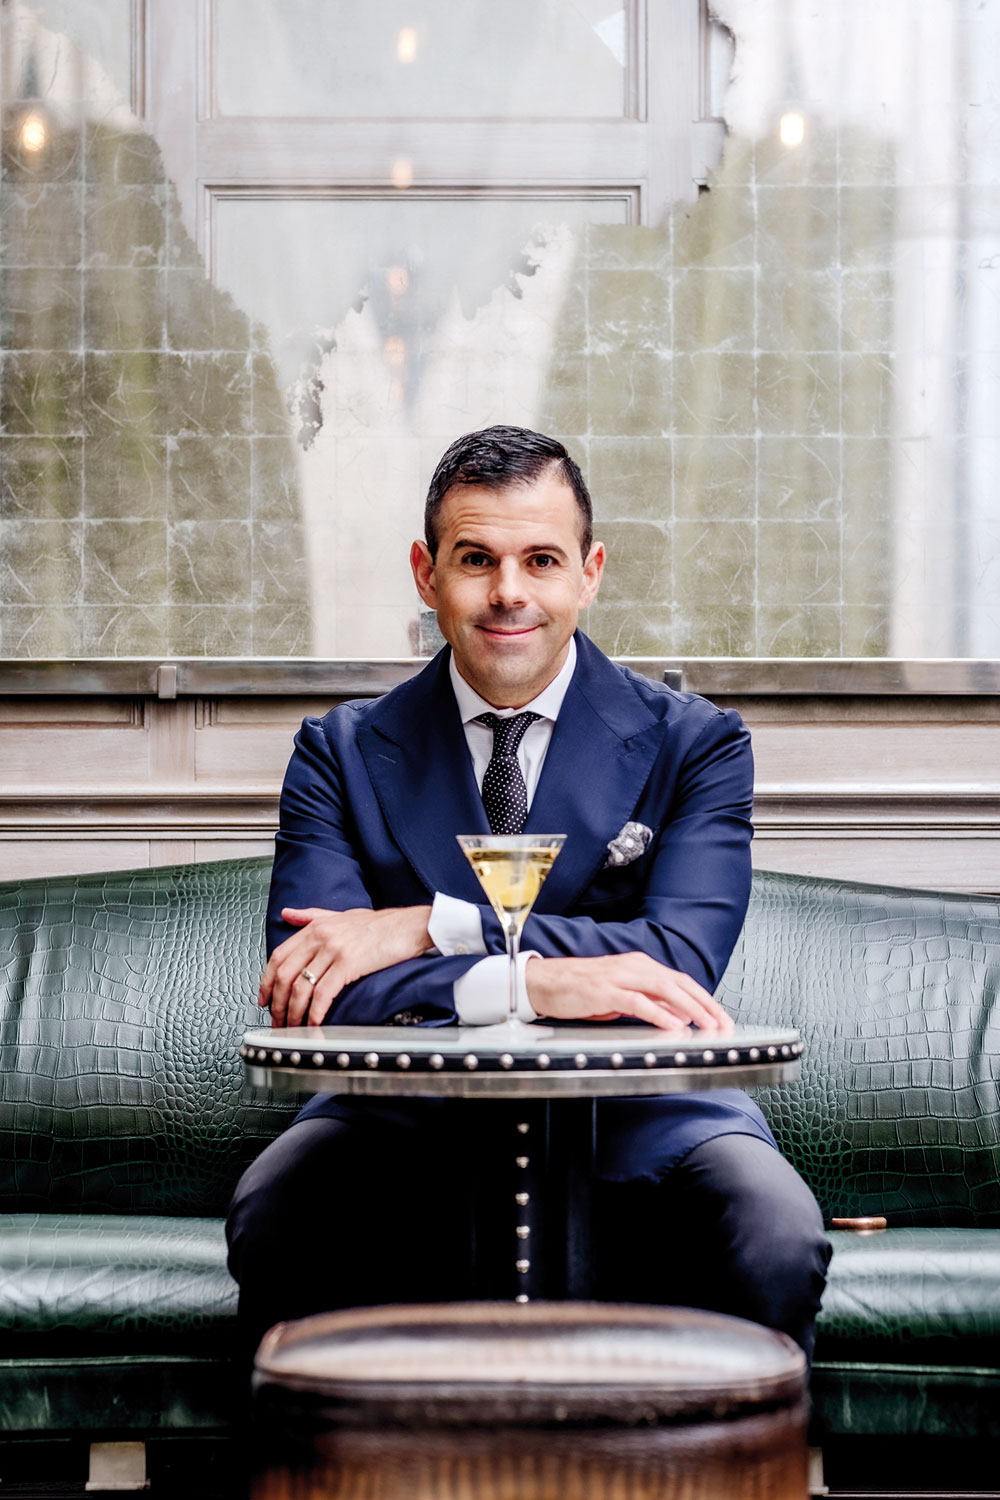 Foodie Tales: The Connaught’s Master Mixologist Agostino Perrone